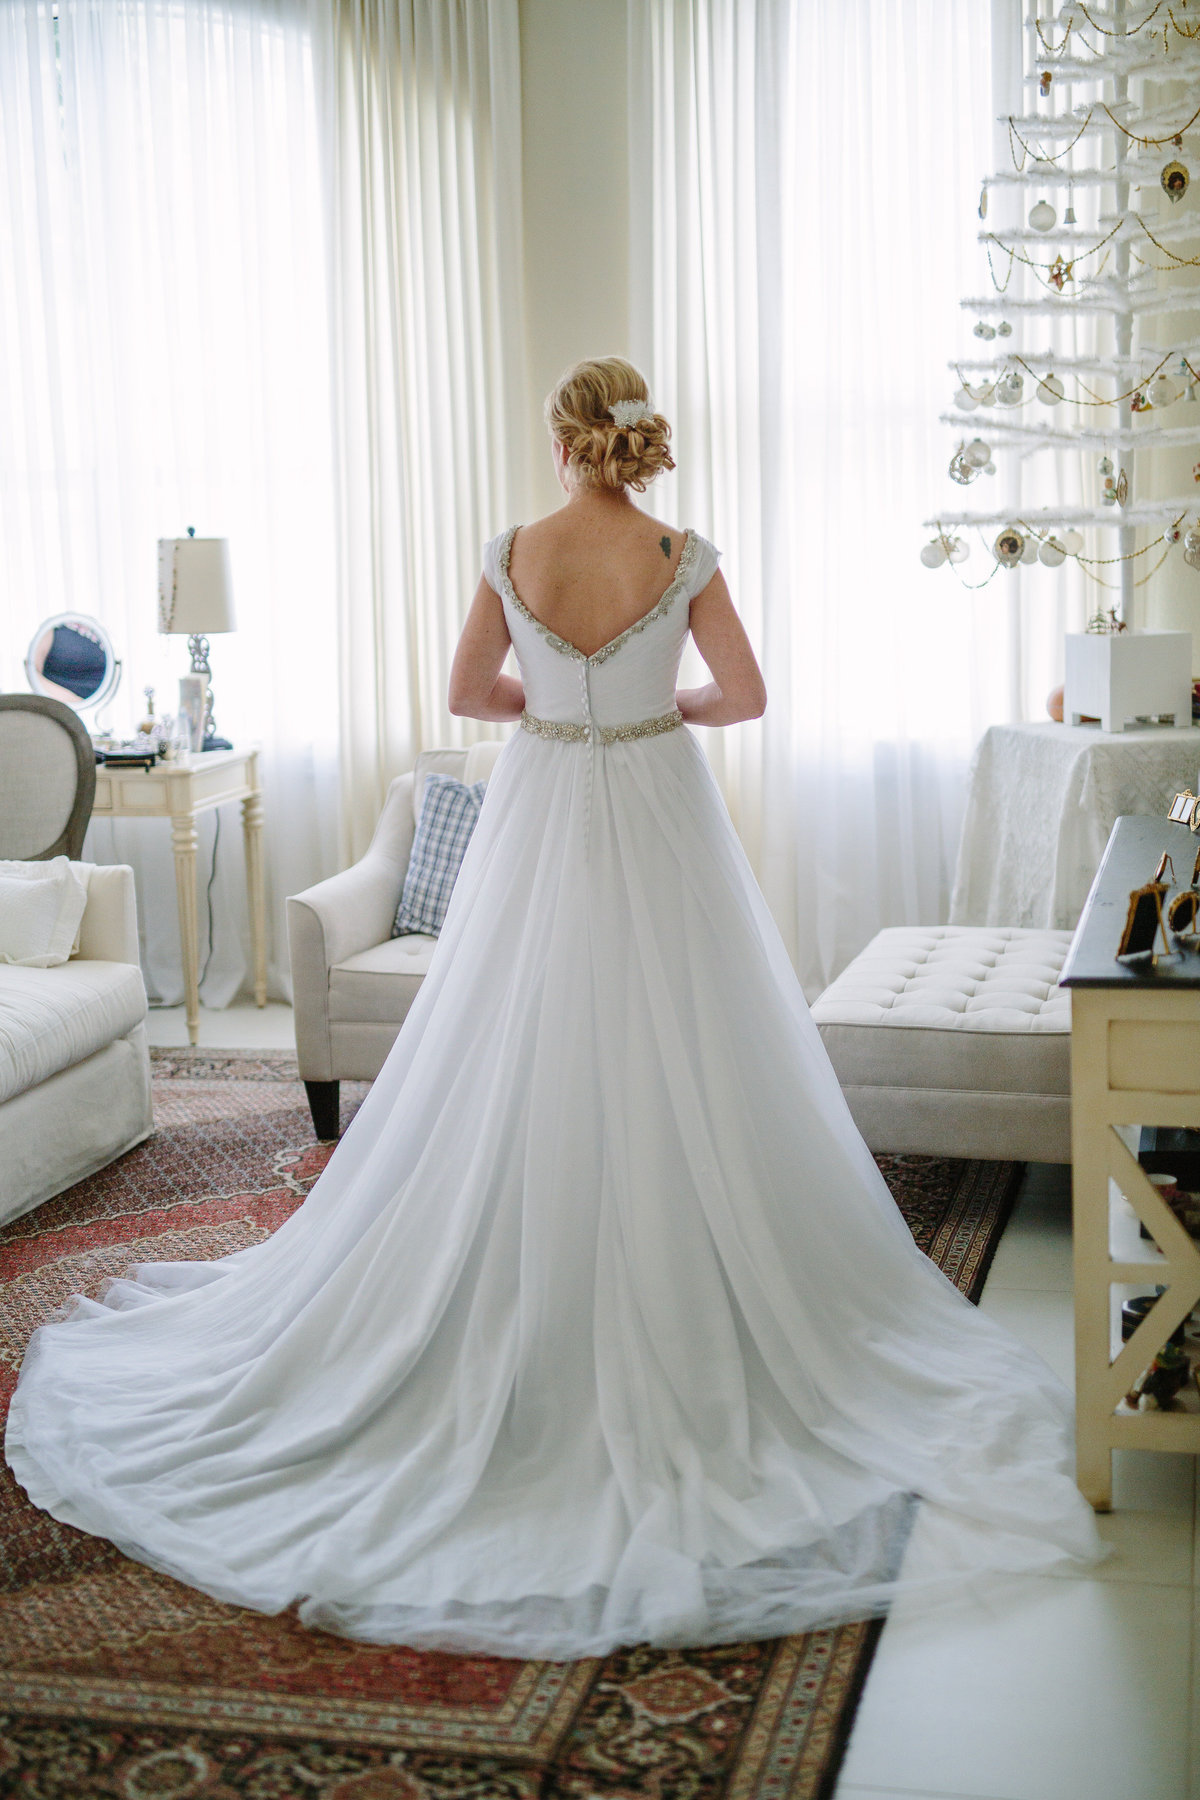 Back view of brides wedding gown after getting dressed for wedding ceremony.